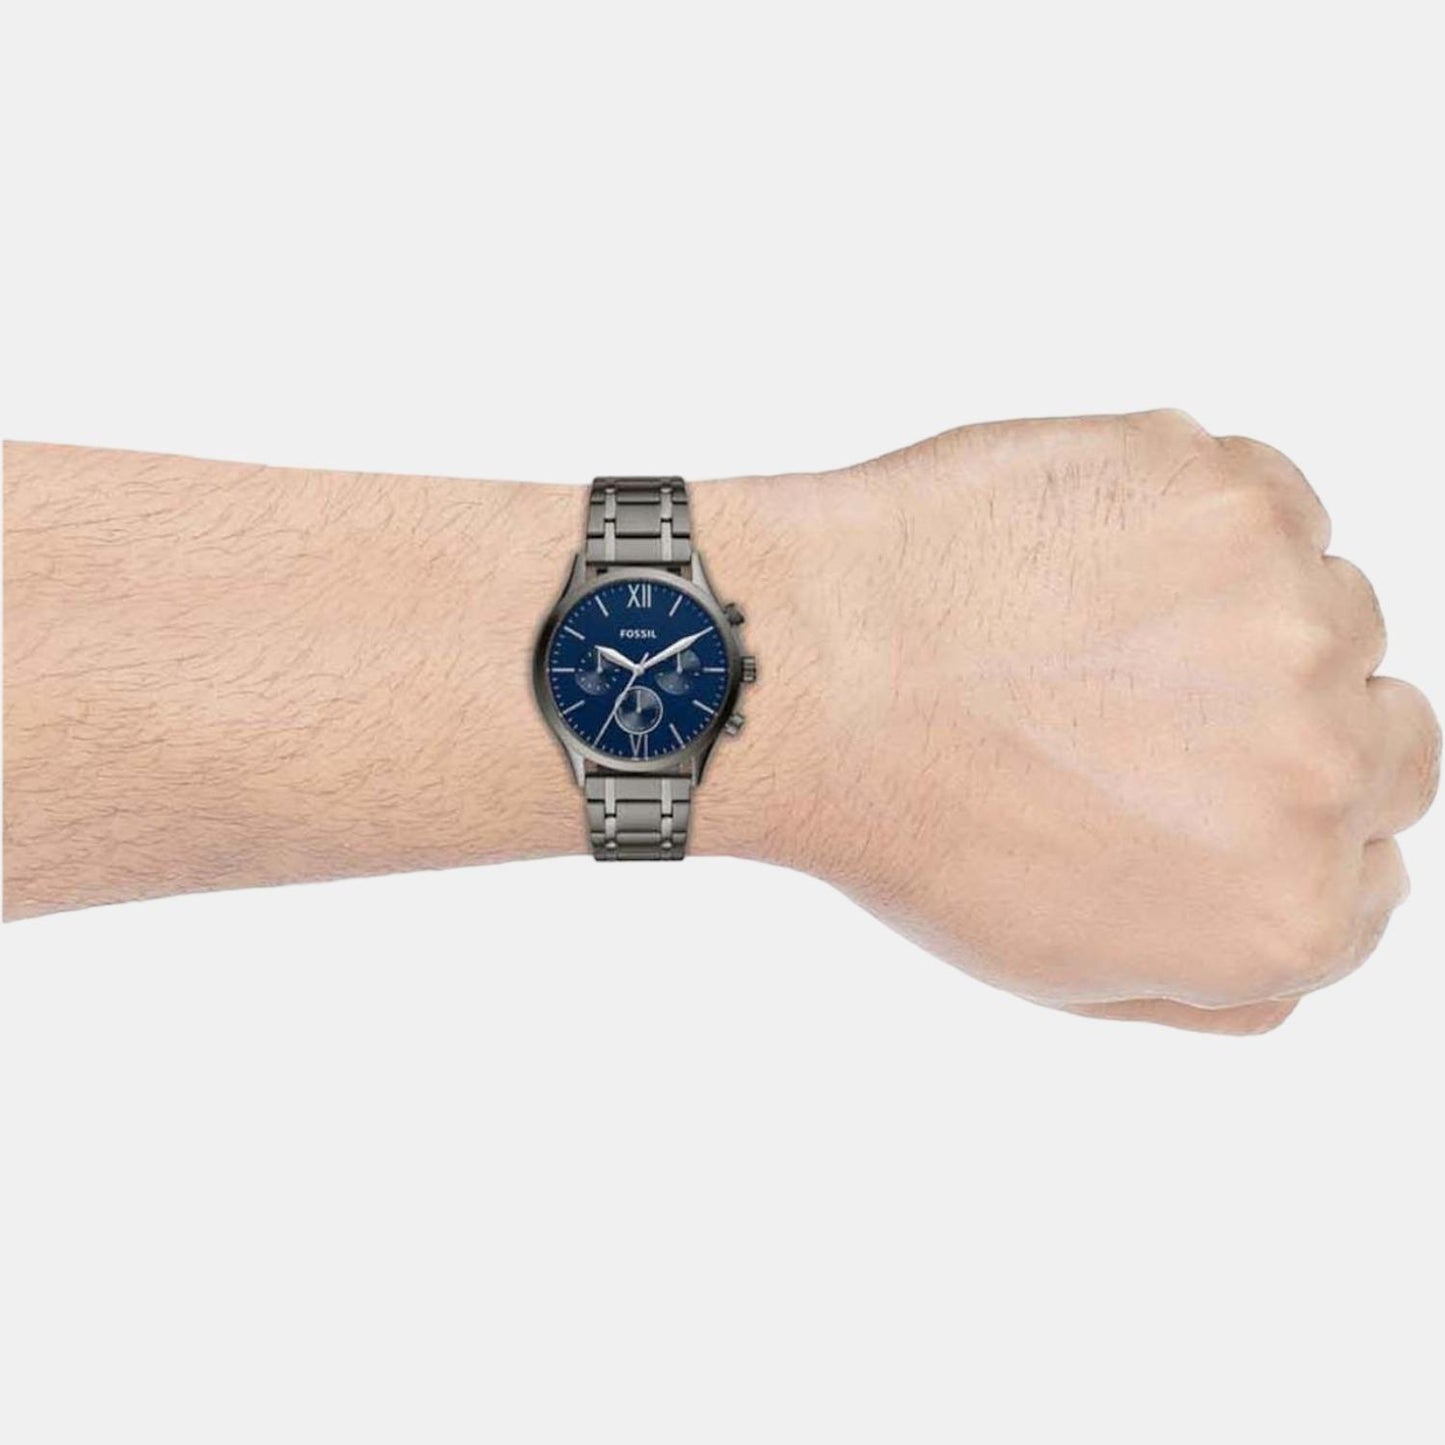 Male Blue Stainless Steel Chronograph Watch BQ2401